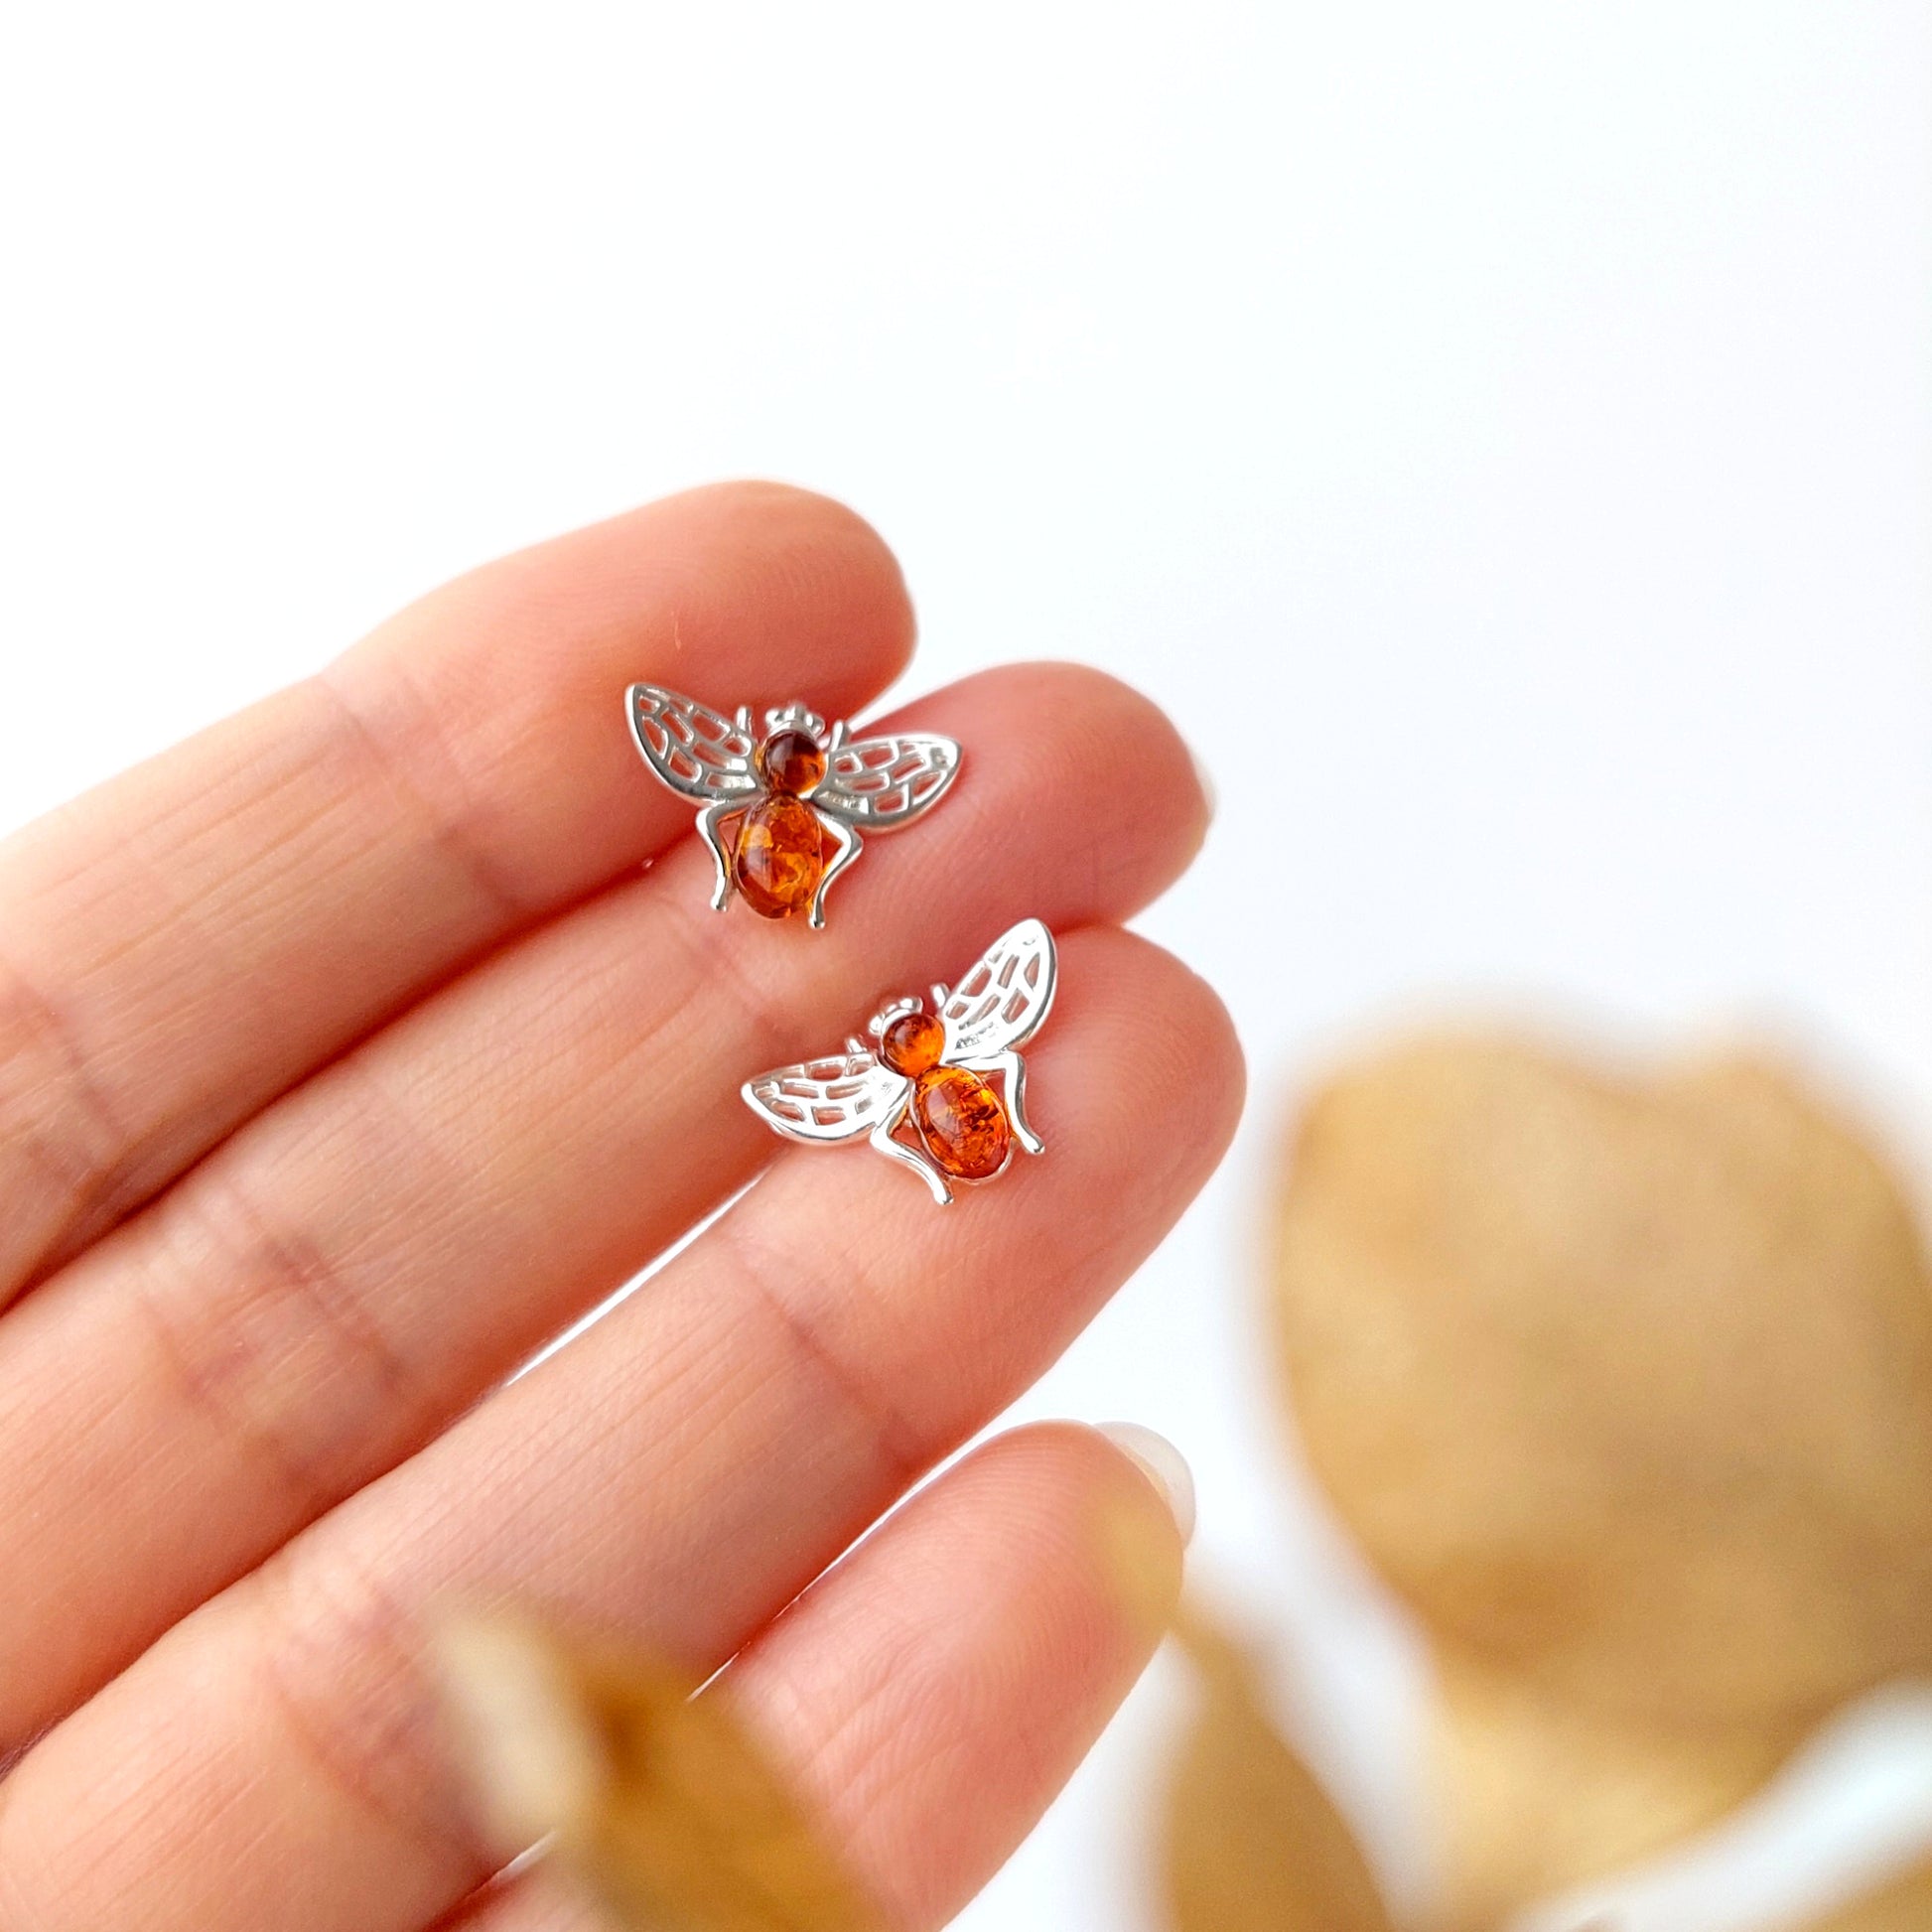 Bee Earrings in Amber, Sterling Silver Bee earrings, Bee Jewelry, Honey Bee Silver Stud earrings, Bee gifts, Amber Jewelry, Bumble Bee, Cute